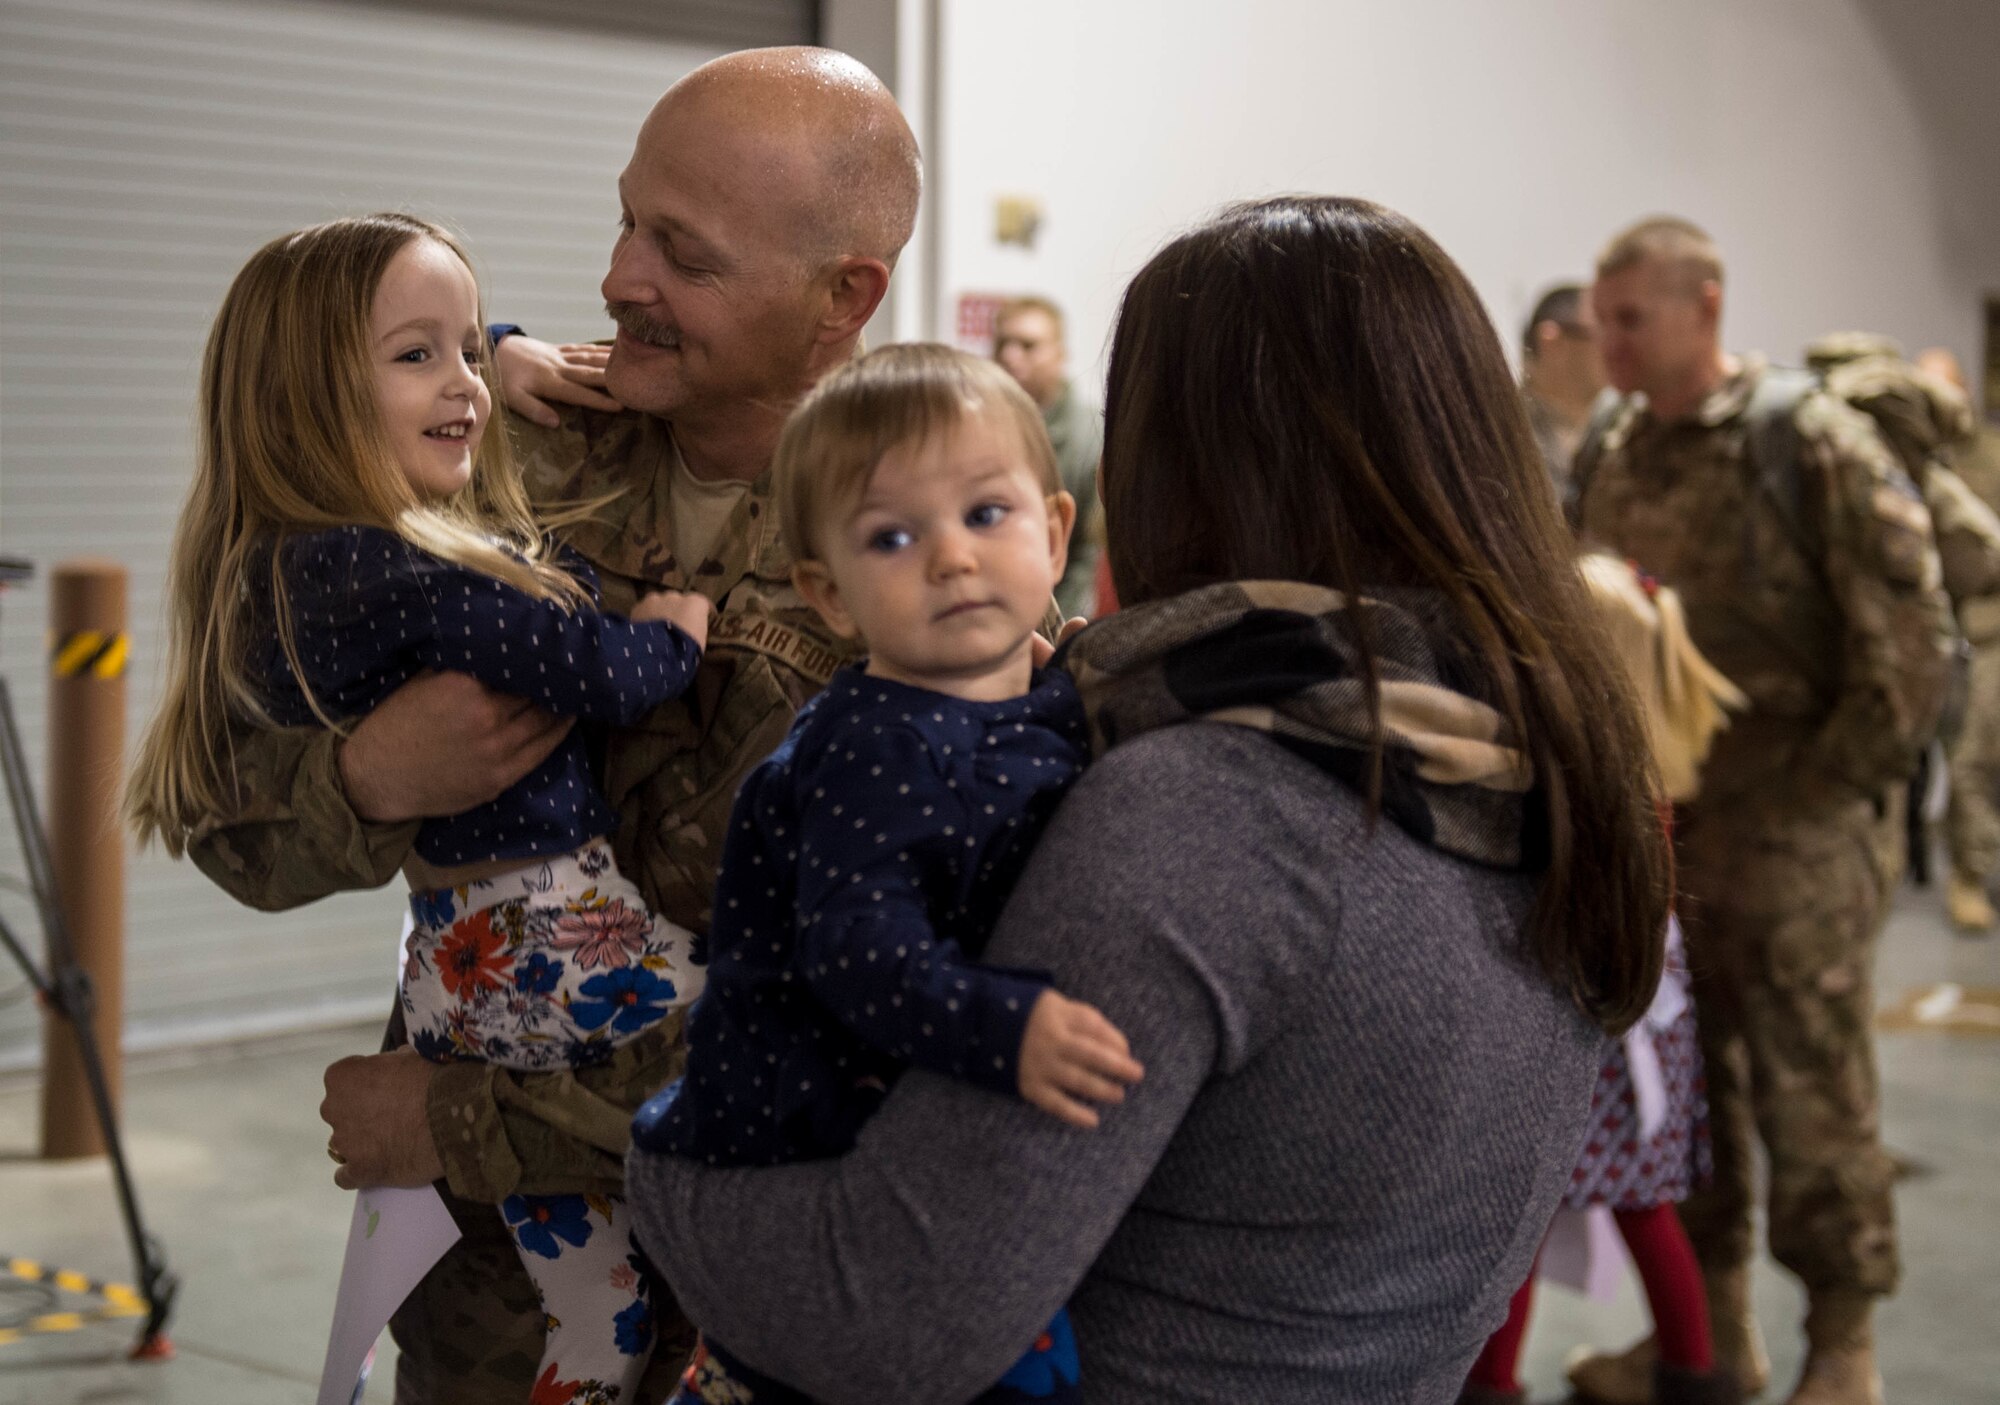 Lt. Col. Blaine Baker, 821st Contingency Response Element commander, hugs his daughter as he returns from a three-month deployment to Iraq, in support of Operation Inherent Resolve, Jan. 18, 2017, at Travis Air Force Base, California. The CRW played a crucial role in reopening Qayyarah West Airfield and moving more than 1,423 short tons of cargo in and out of the region. (U.S. Air Force Photo by Staff Sgt. Robert Hicks)